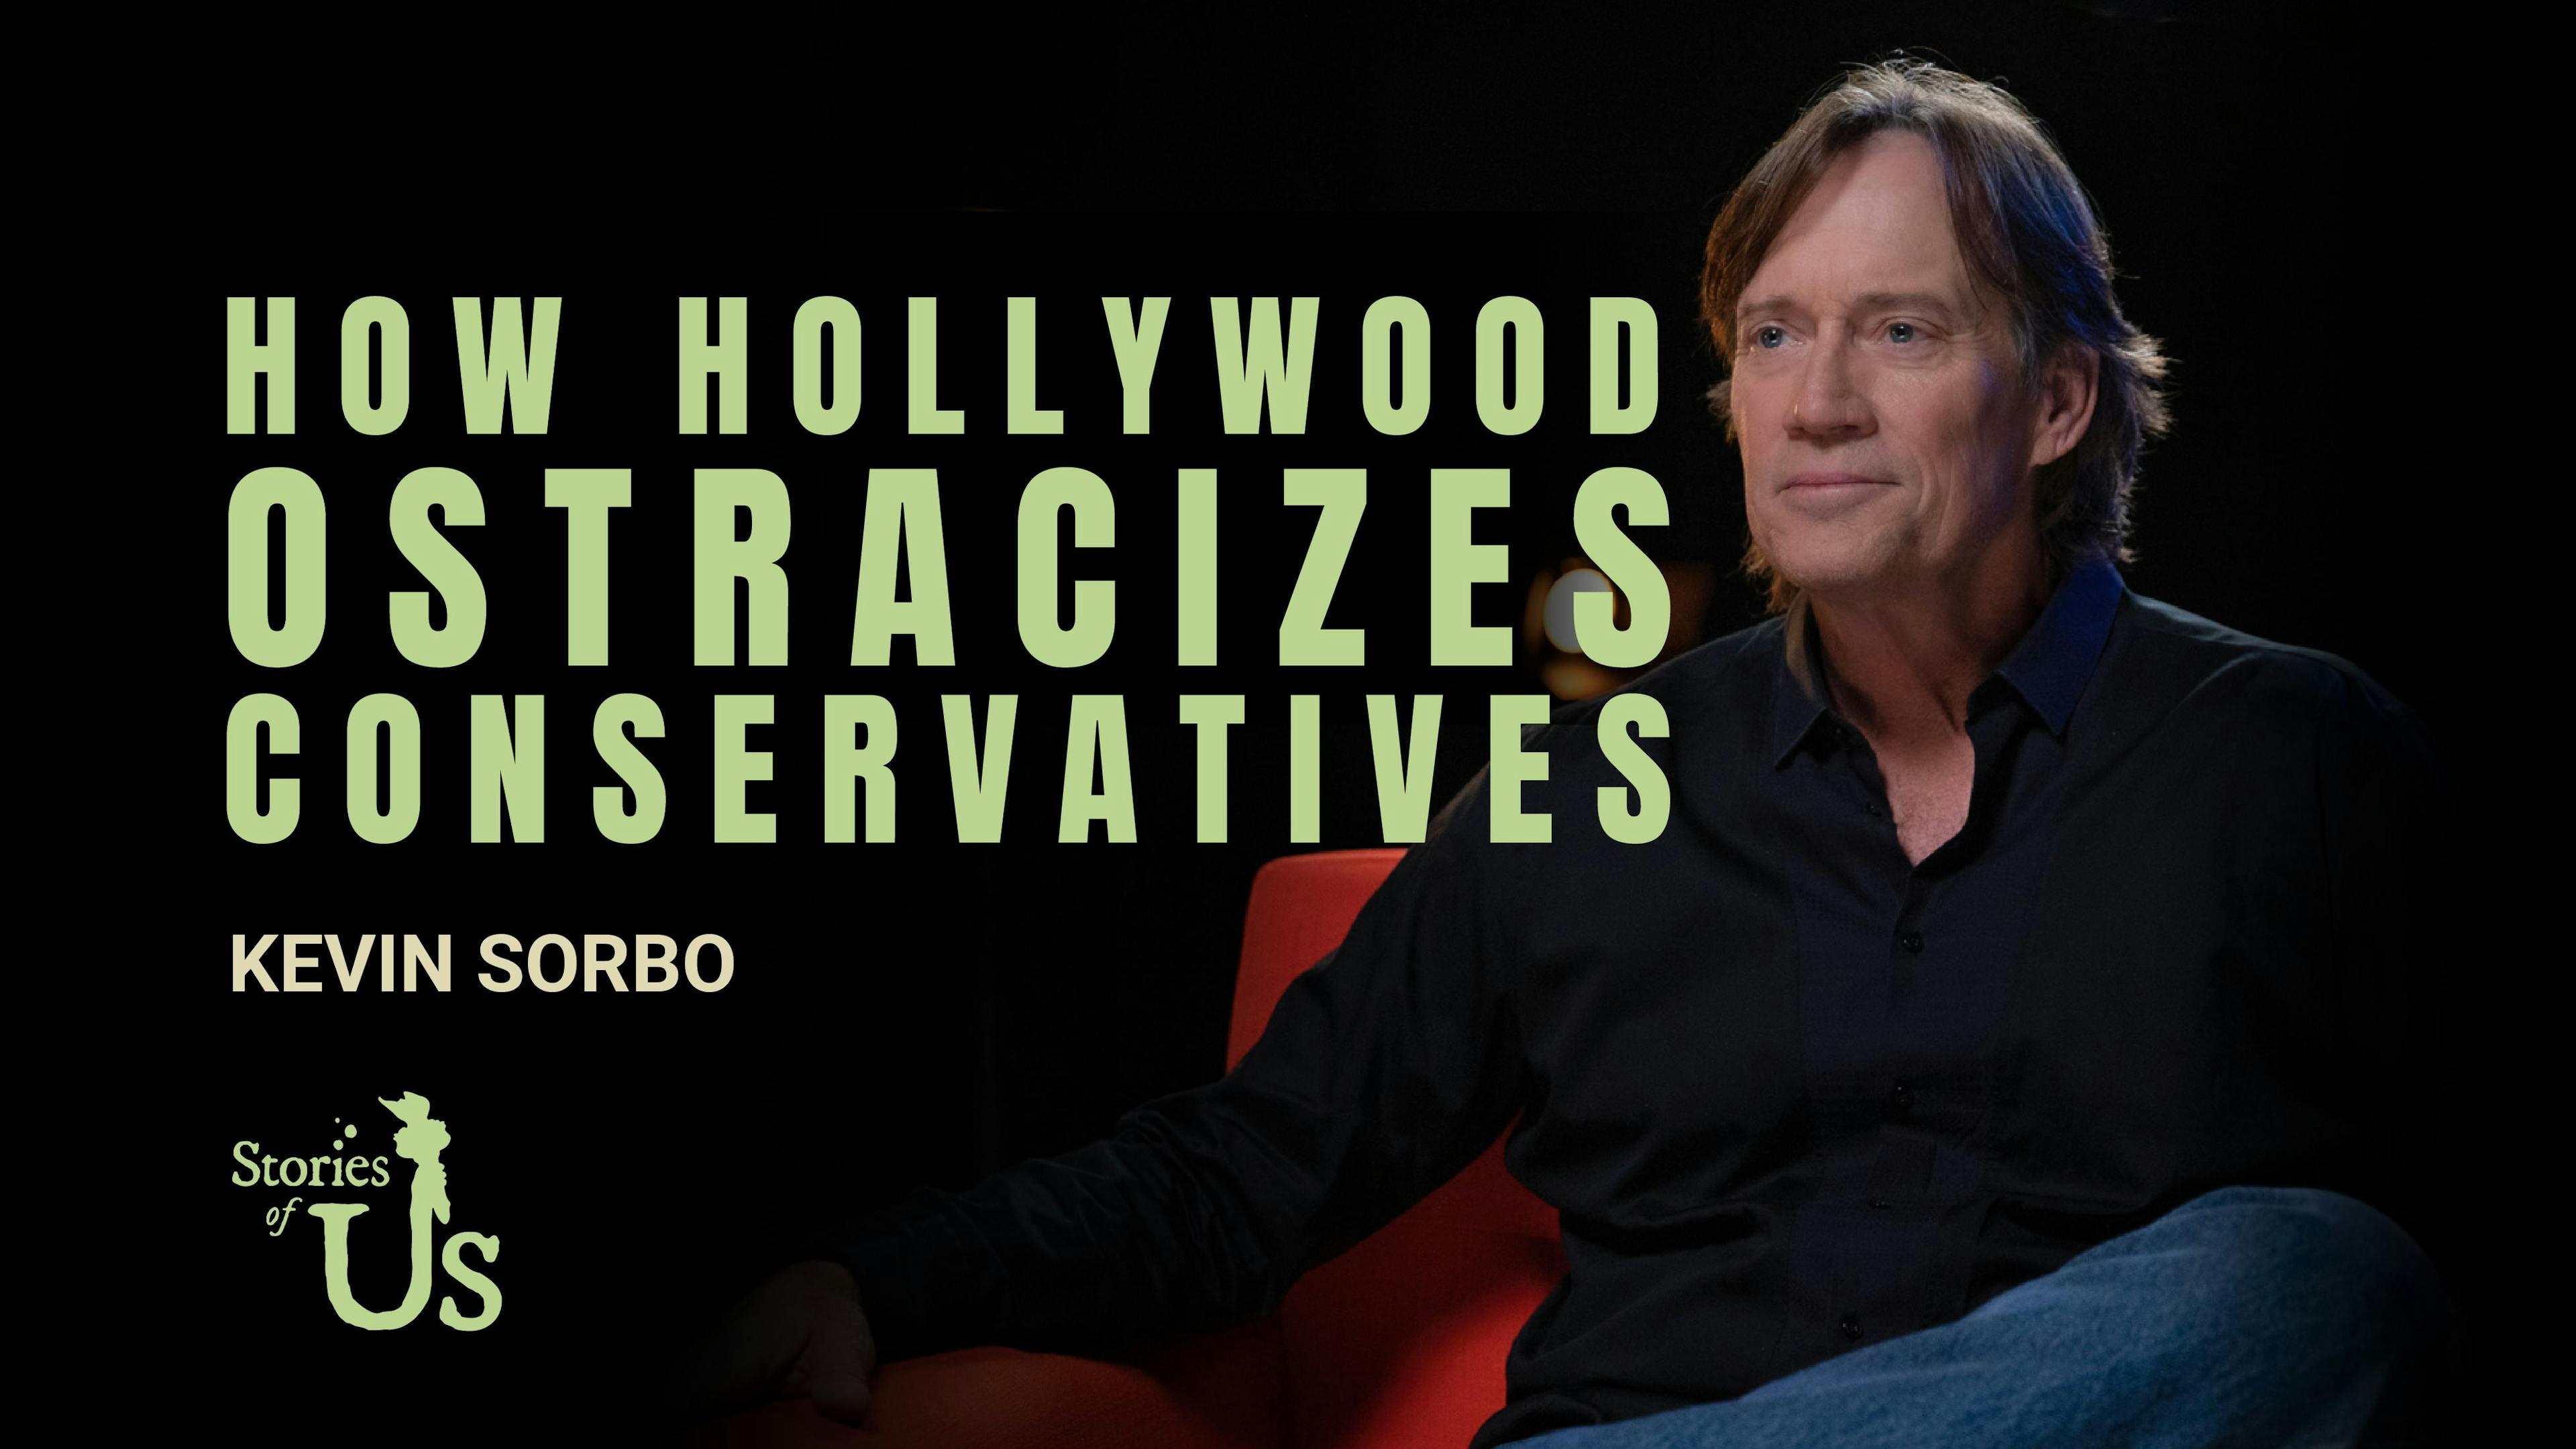 Kevin Sorbo: How Hollywood Ostracizes Conservatives